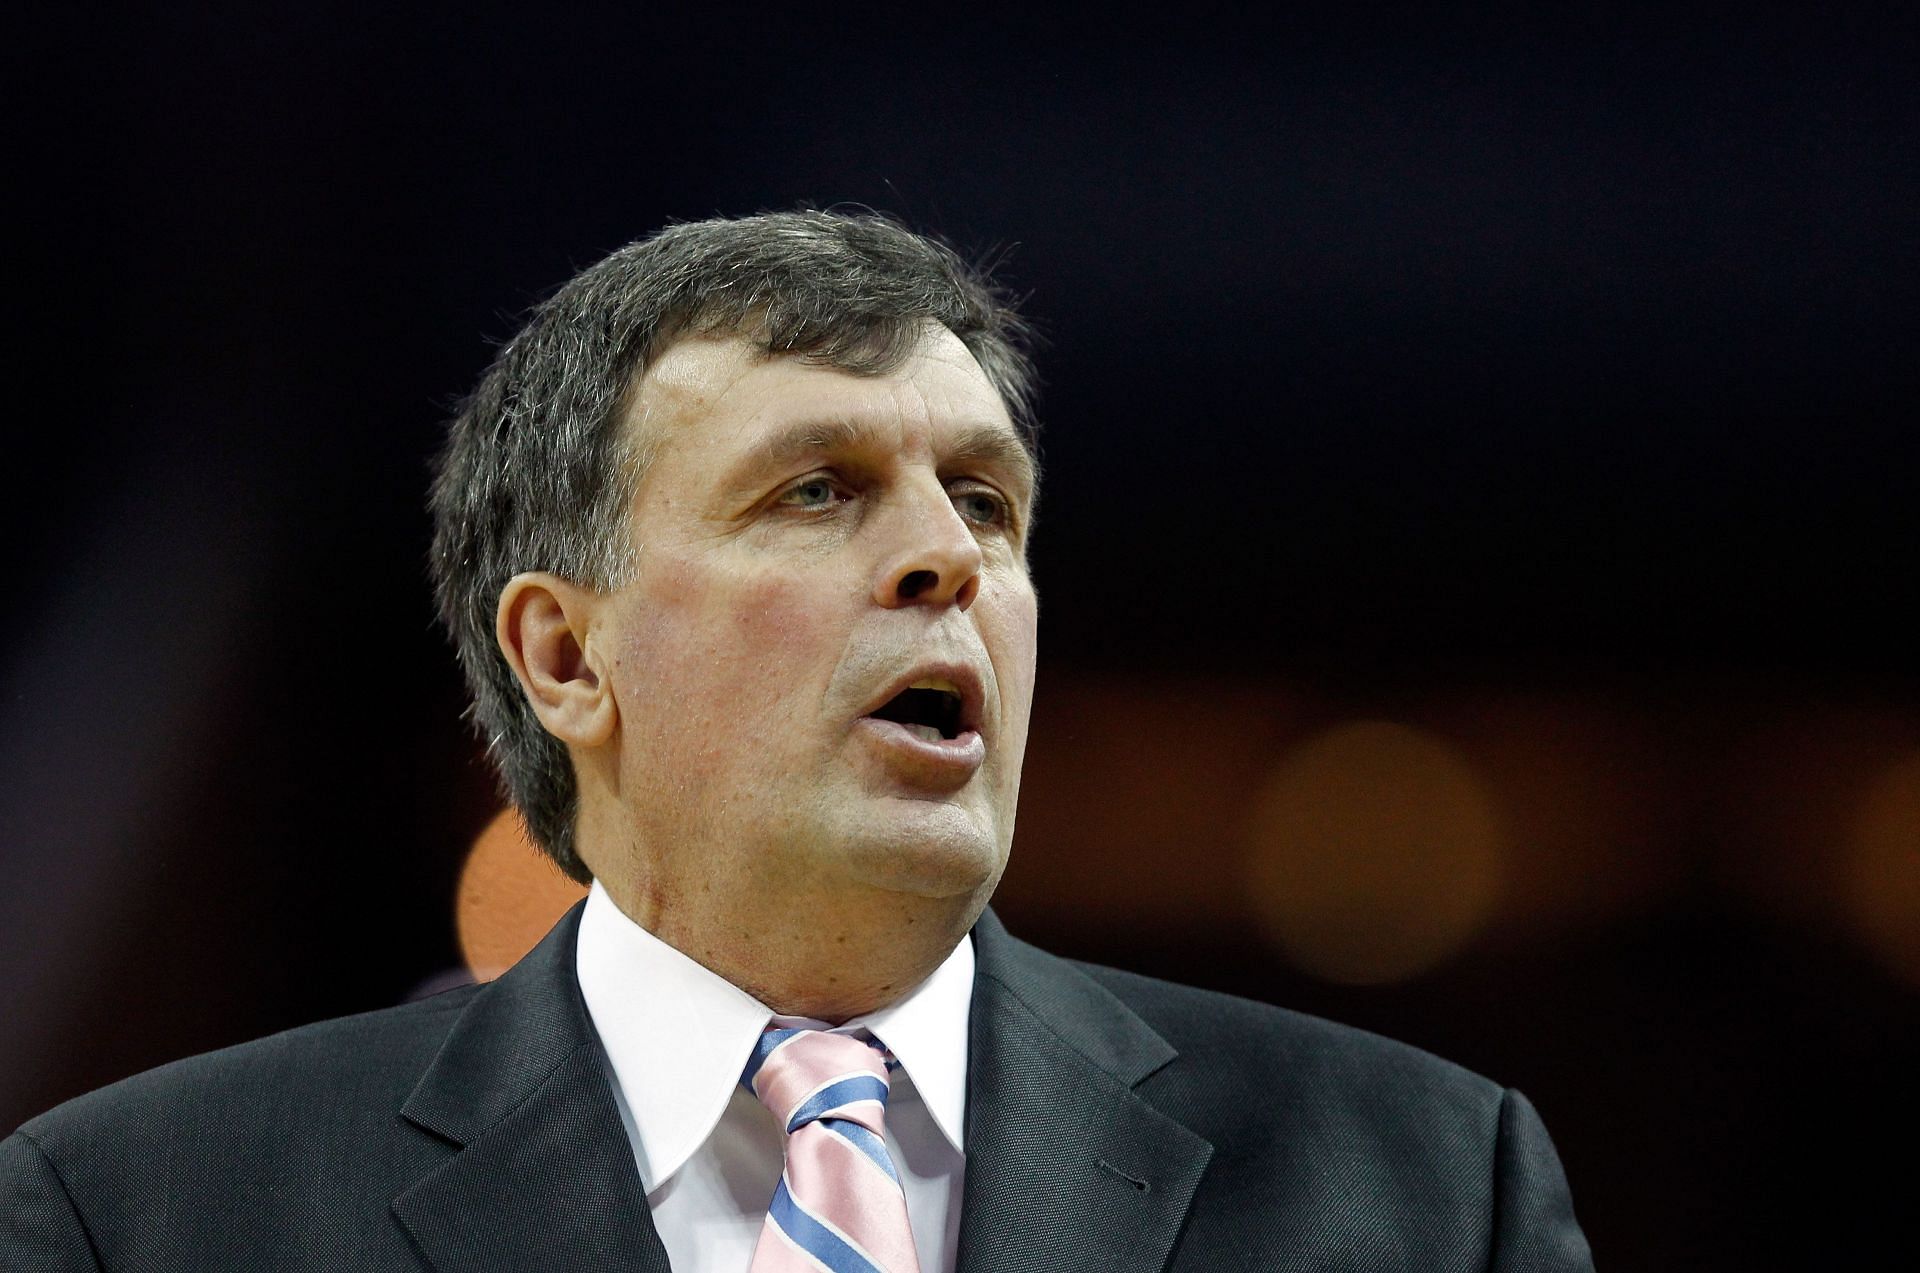 Kevin McHale was the Minnesota Timberwolves&#039; vice president from 1995 to 2008